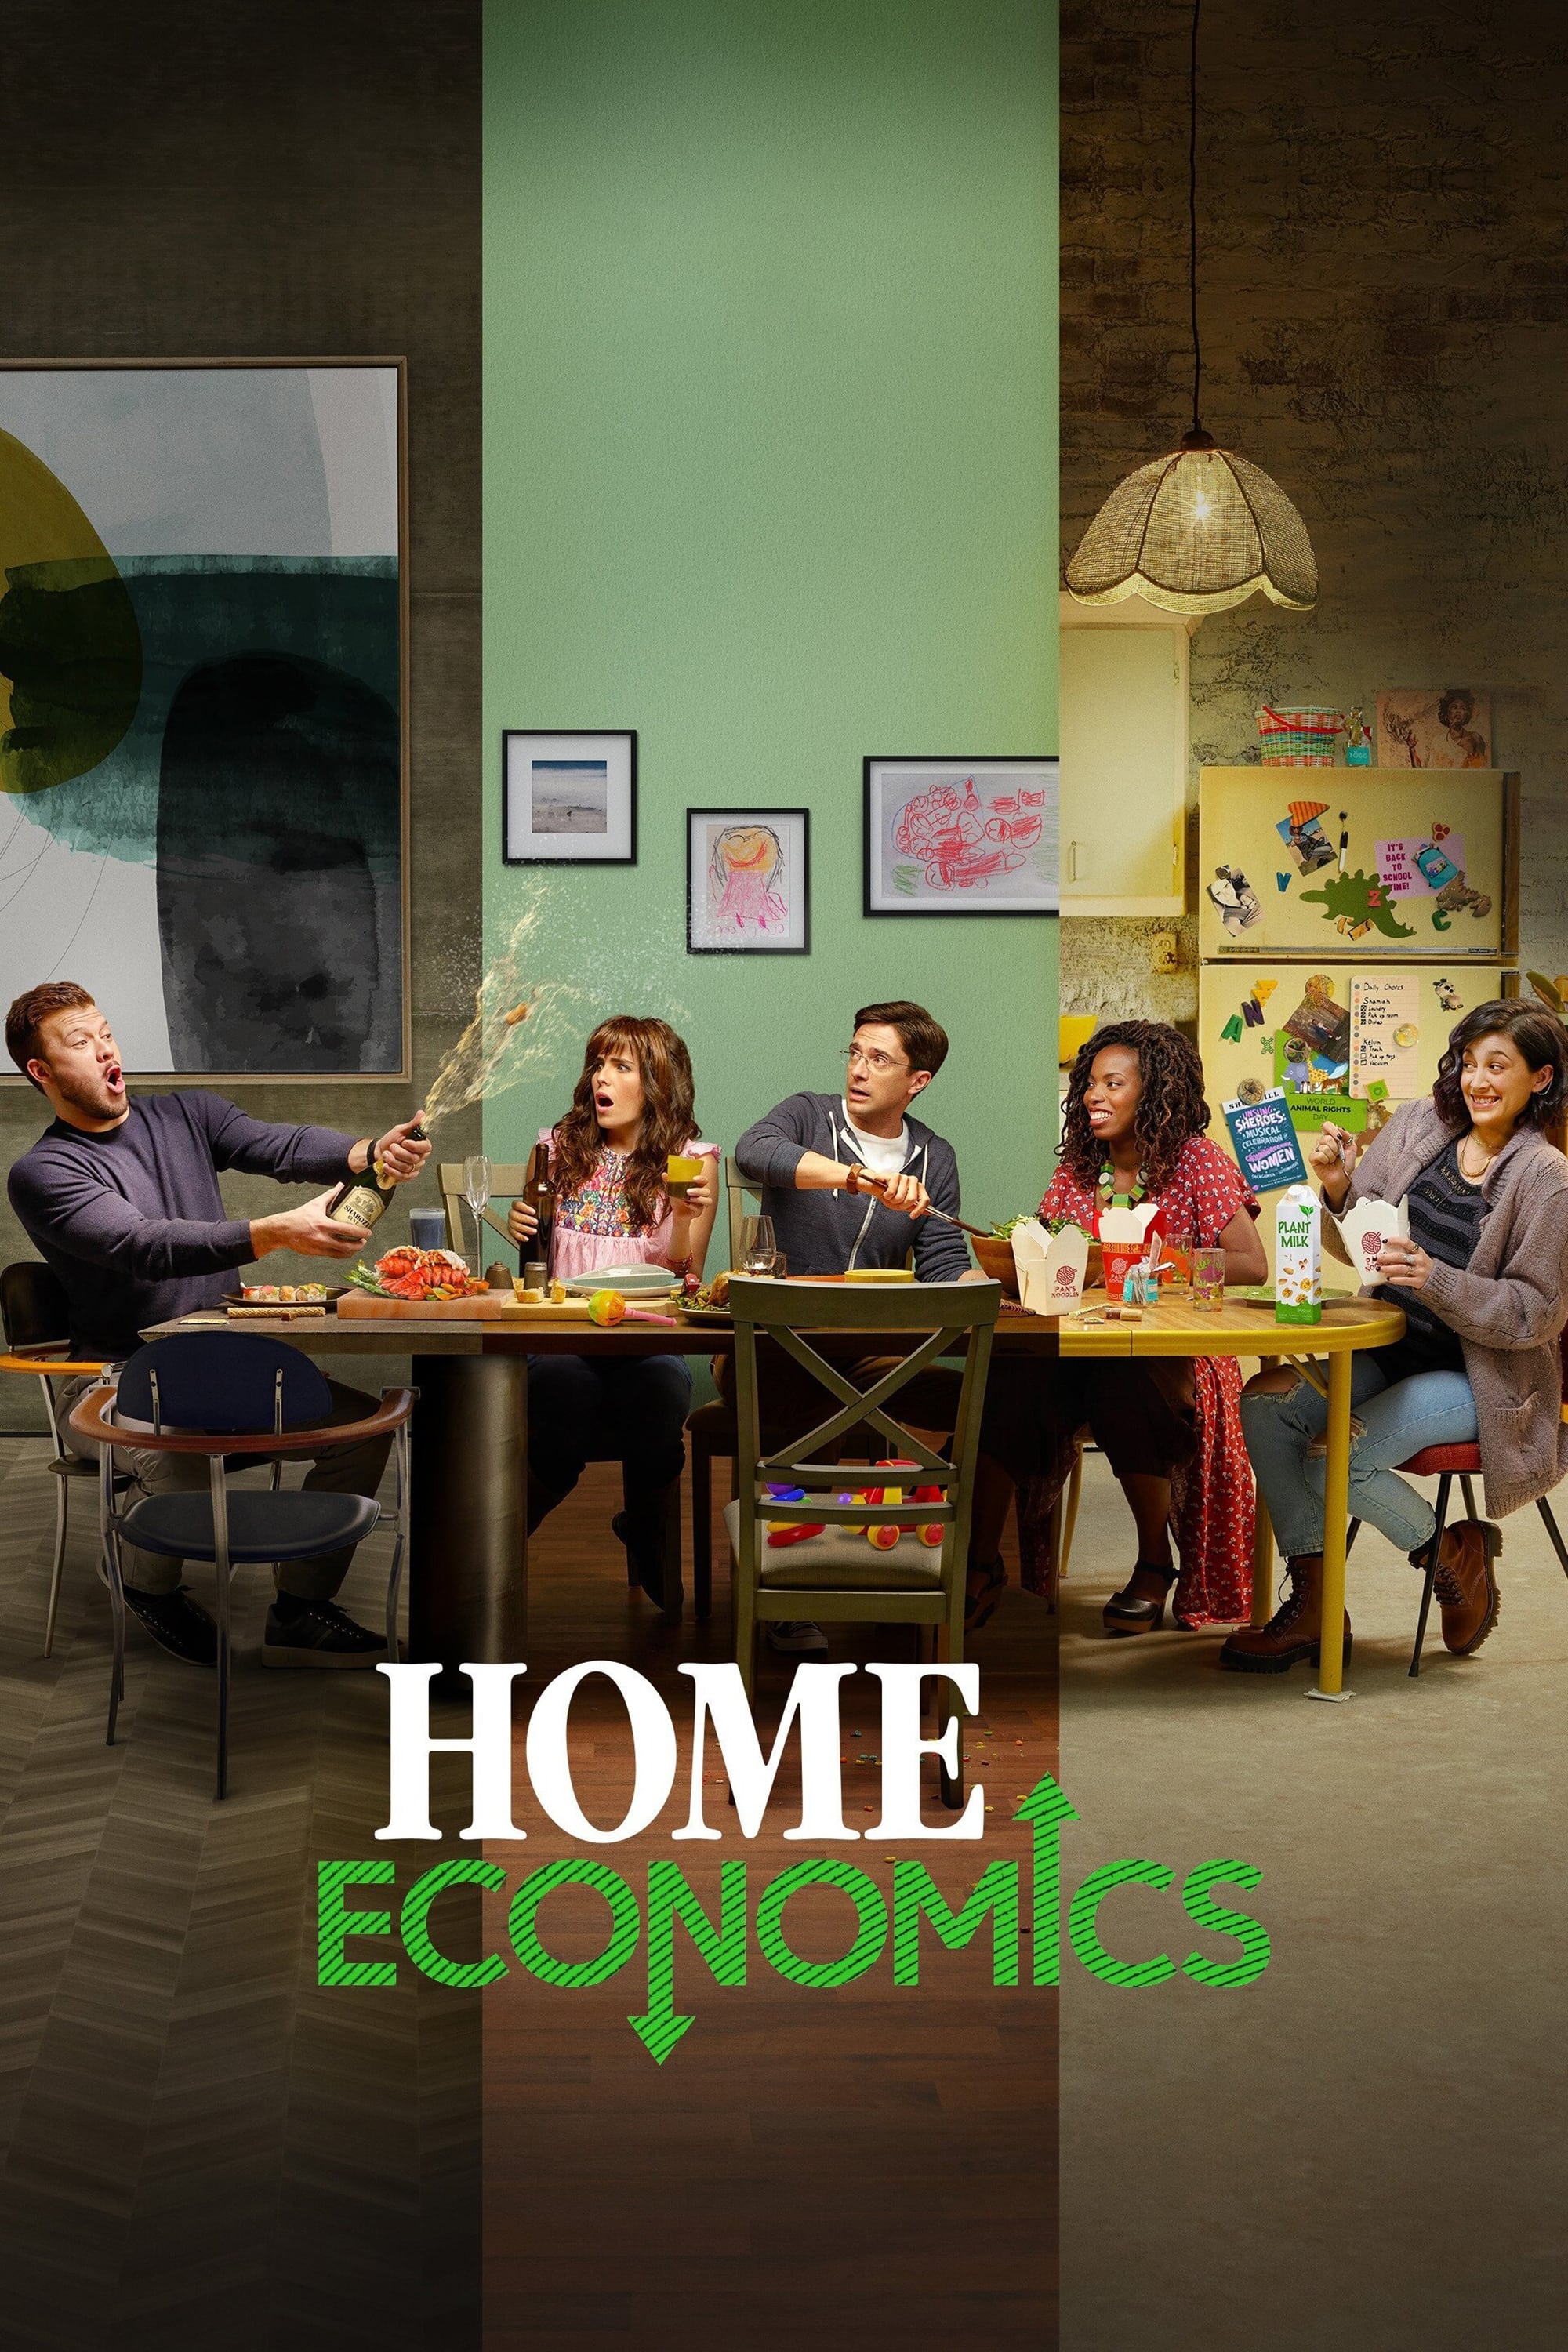 Home Economics TV Shows About Marriage